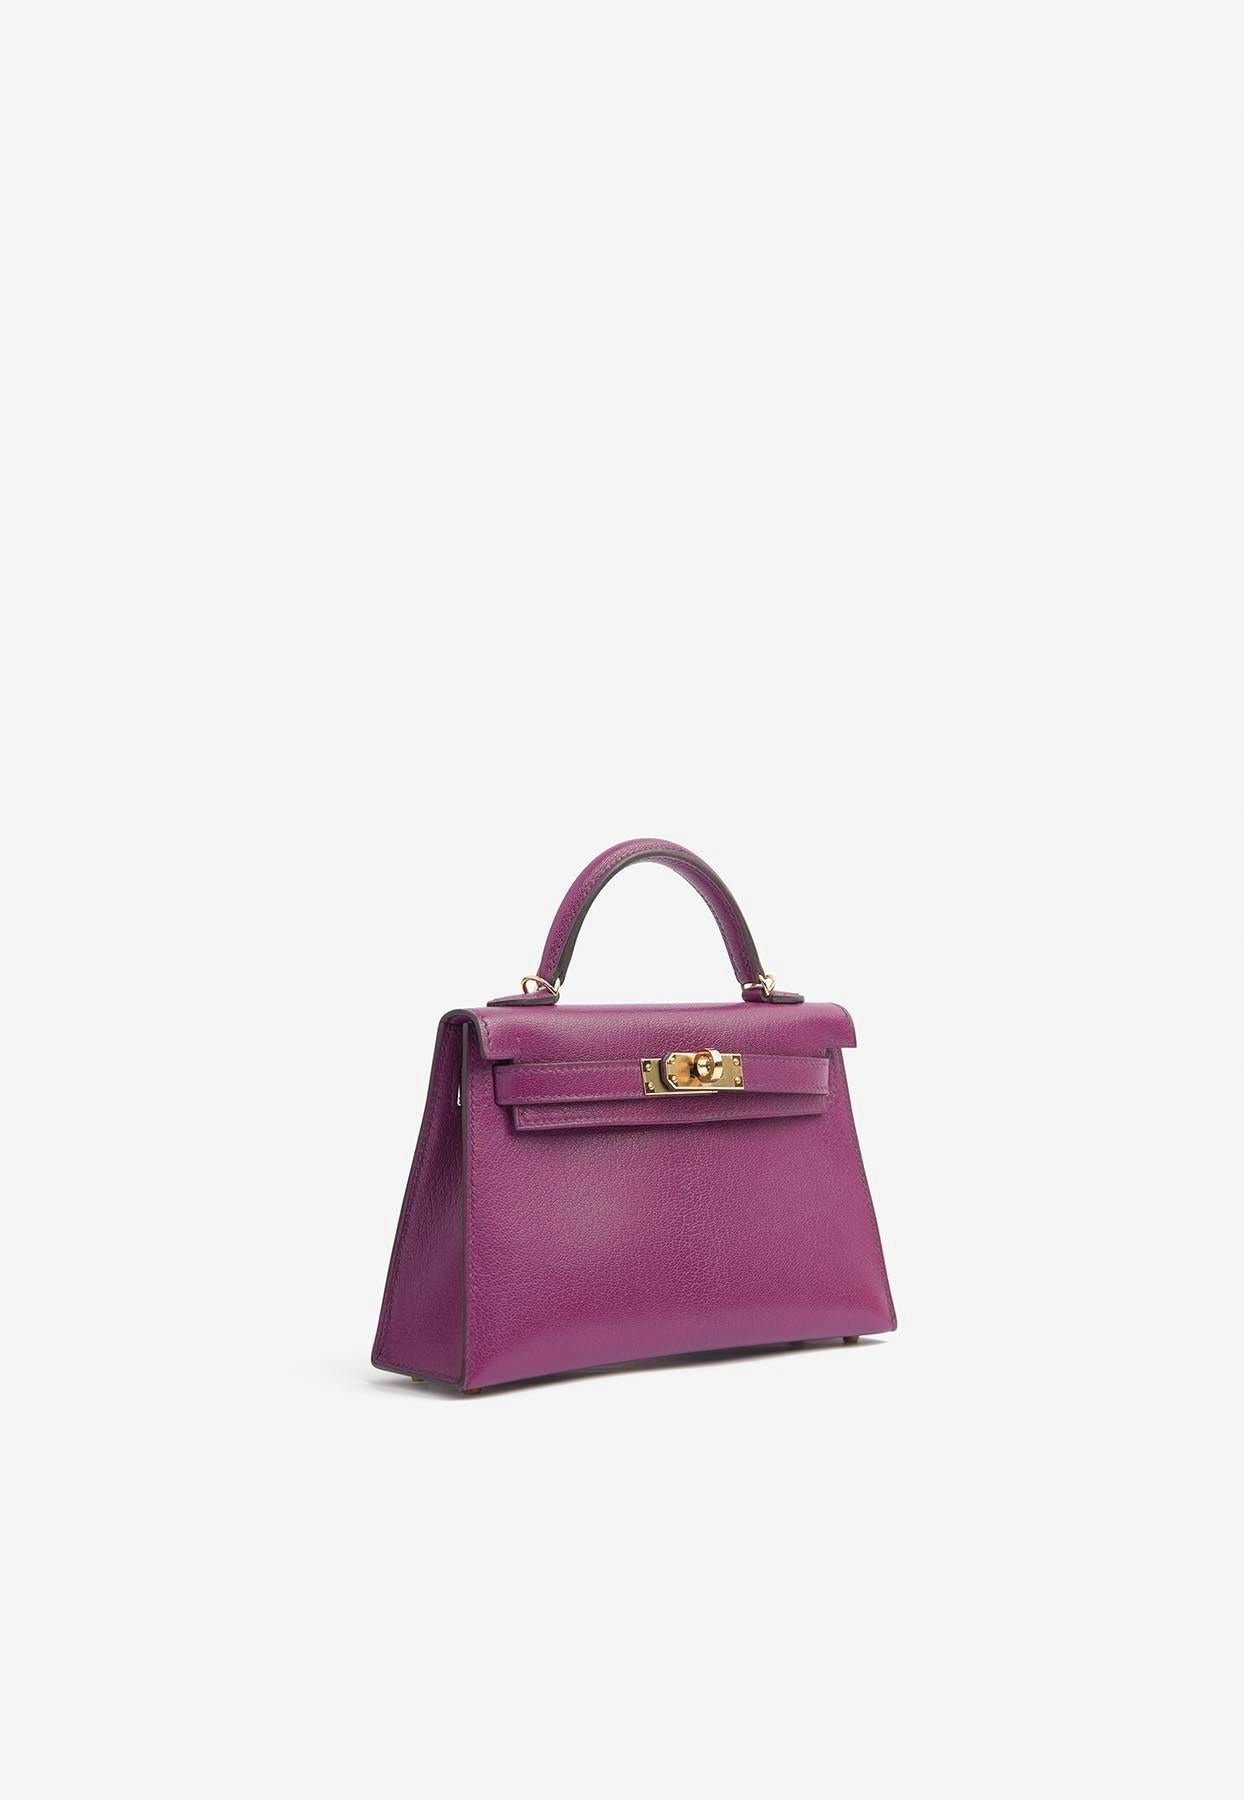 Material: 100% Chèvre Mysore leather
Permabrass hardware
One top handle
Signature strap closure
Signature turn-lock
Removable crossbody strap
Made in France
Comes in a signature Hermès box and with a dust bag and strap